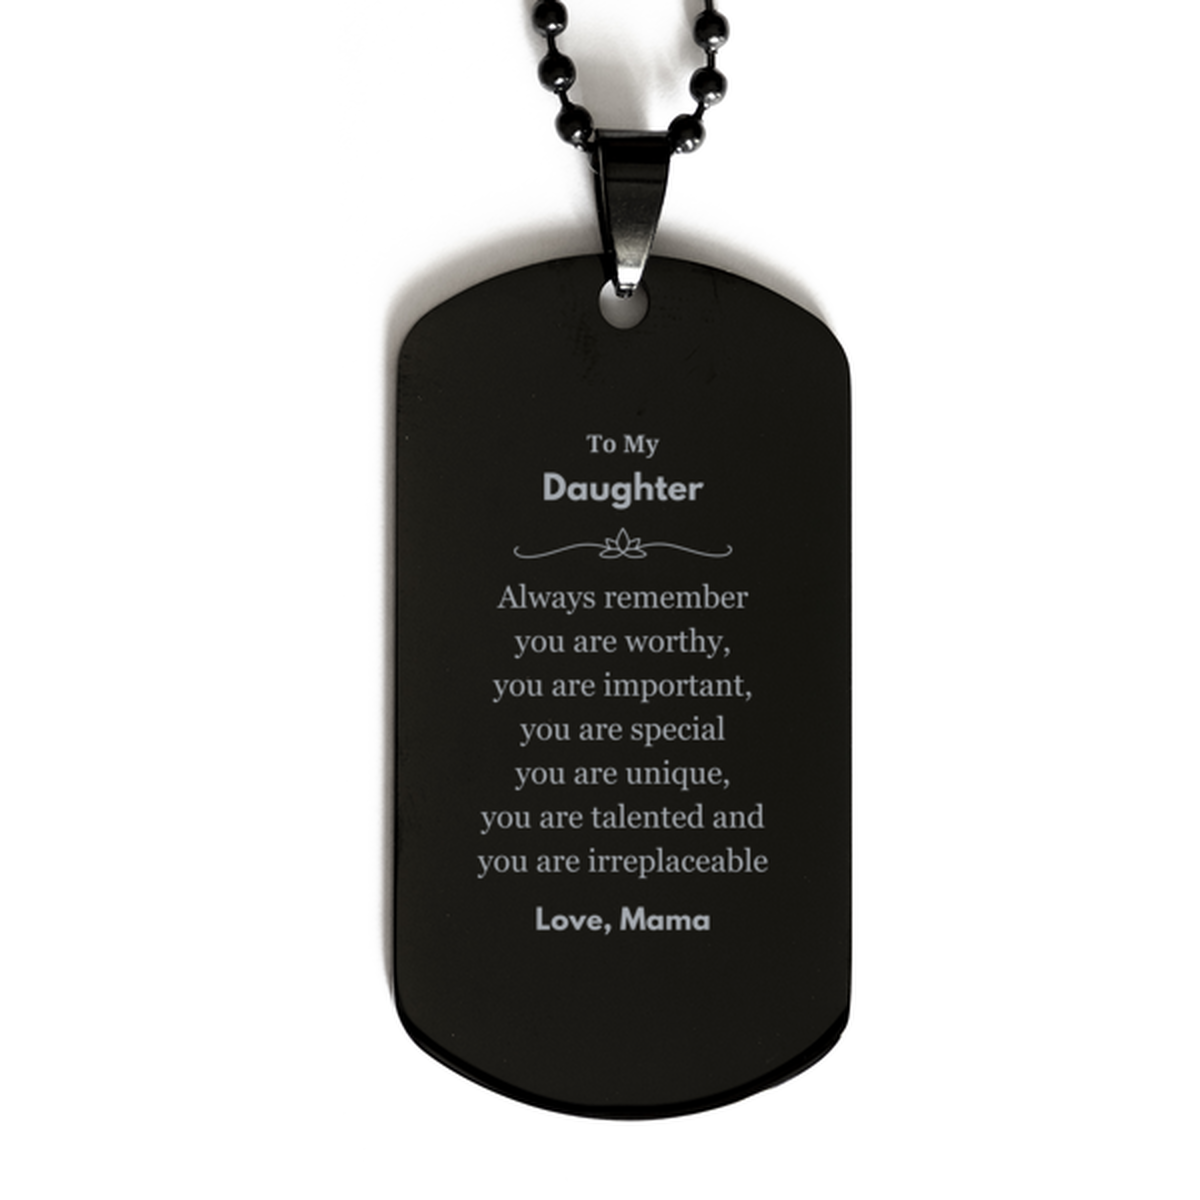 Daughter Birthday Gifts from Mama, Inspirational Black Dog Tag for Daughter Christmas Graduation Gifts for Daughter Always remember you are worthy, you are important. Love, Mama